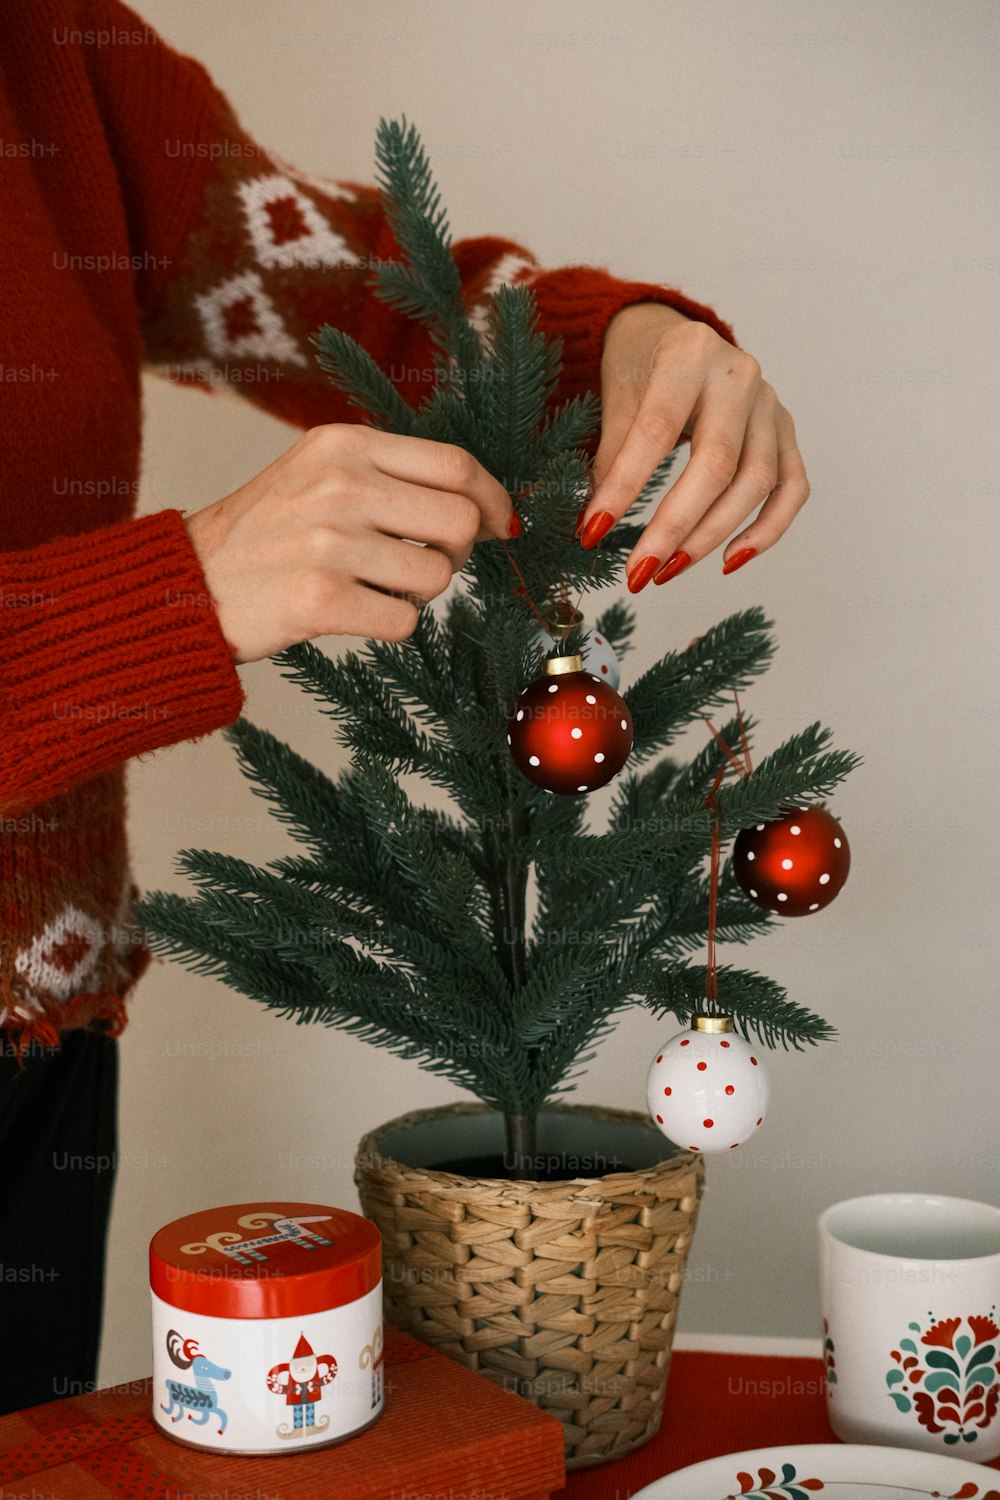 Female hand holding Christmas decorations. A star-shaped biscuit